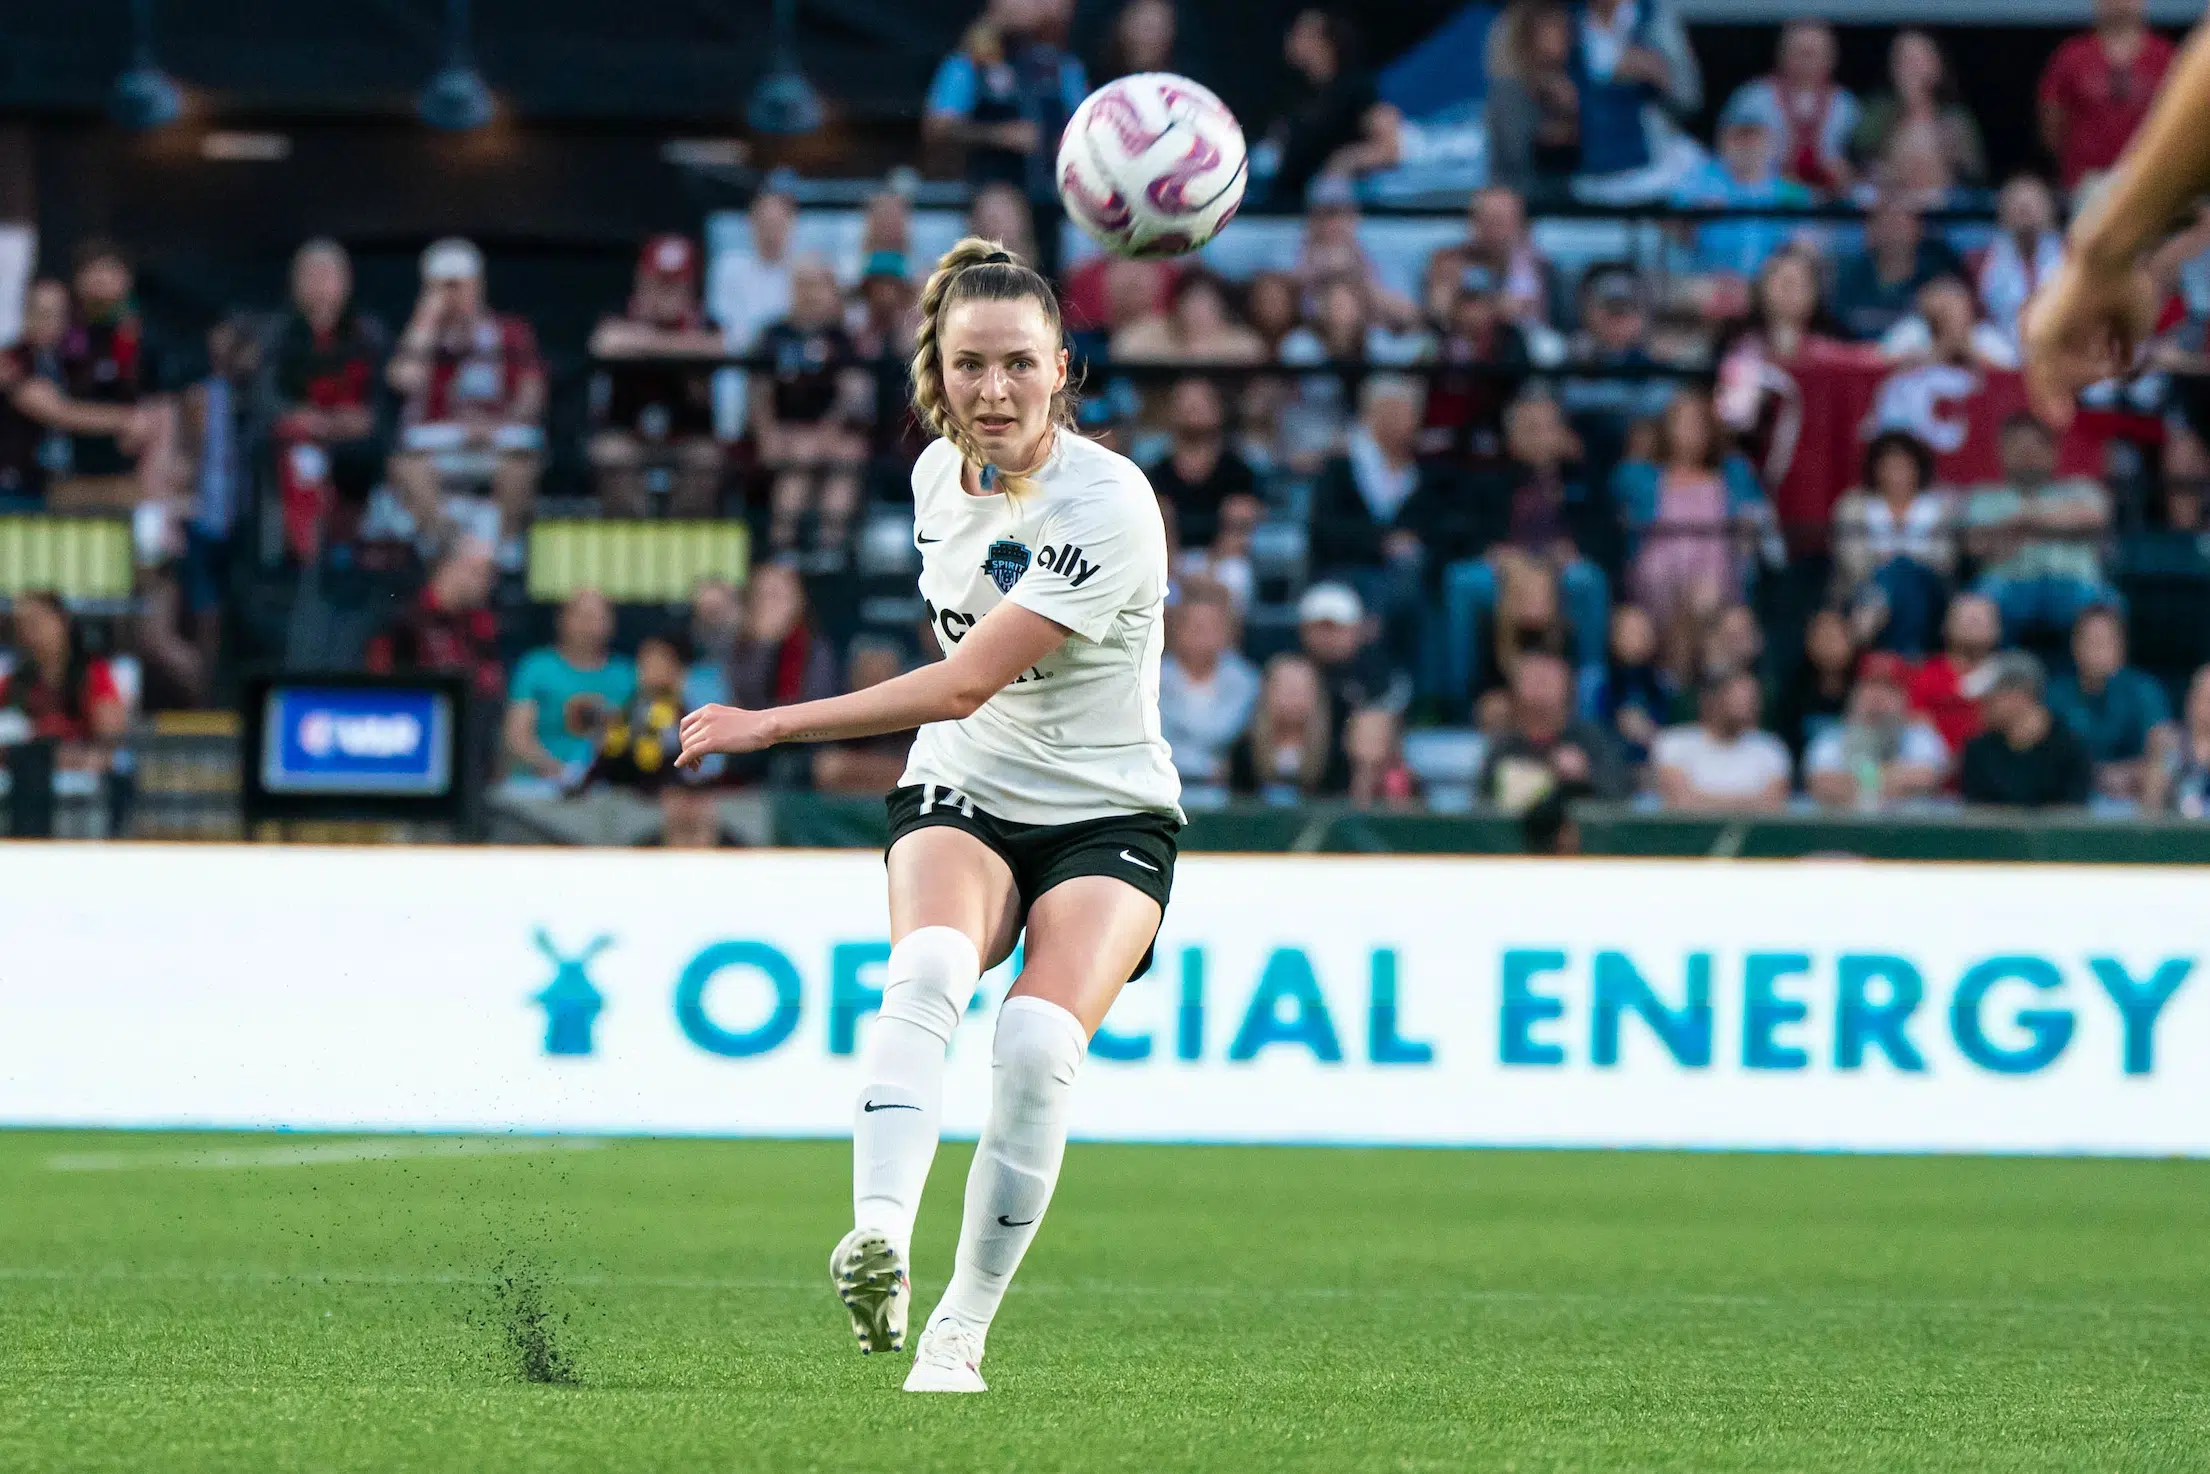 Gabby Carle in a white jersey, black shorts and white socks kicks a soccer ball.